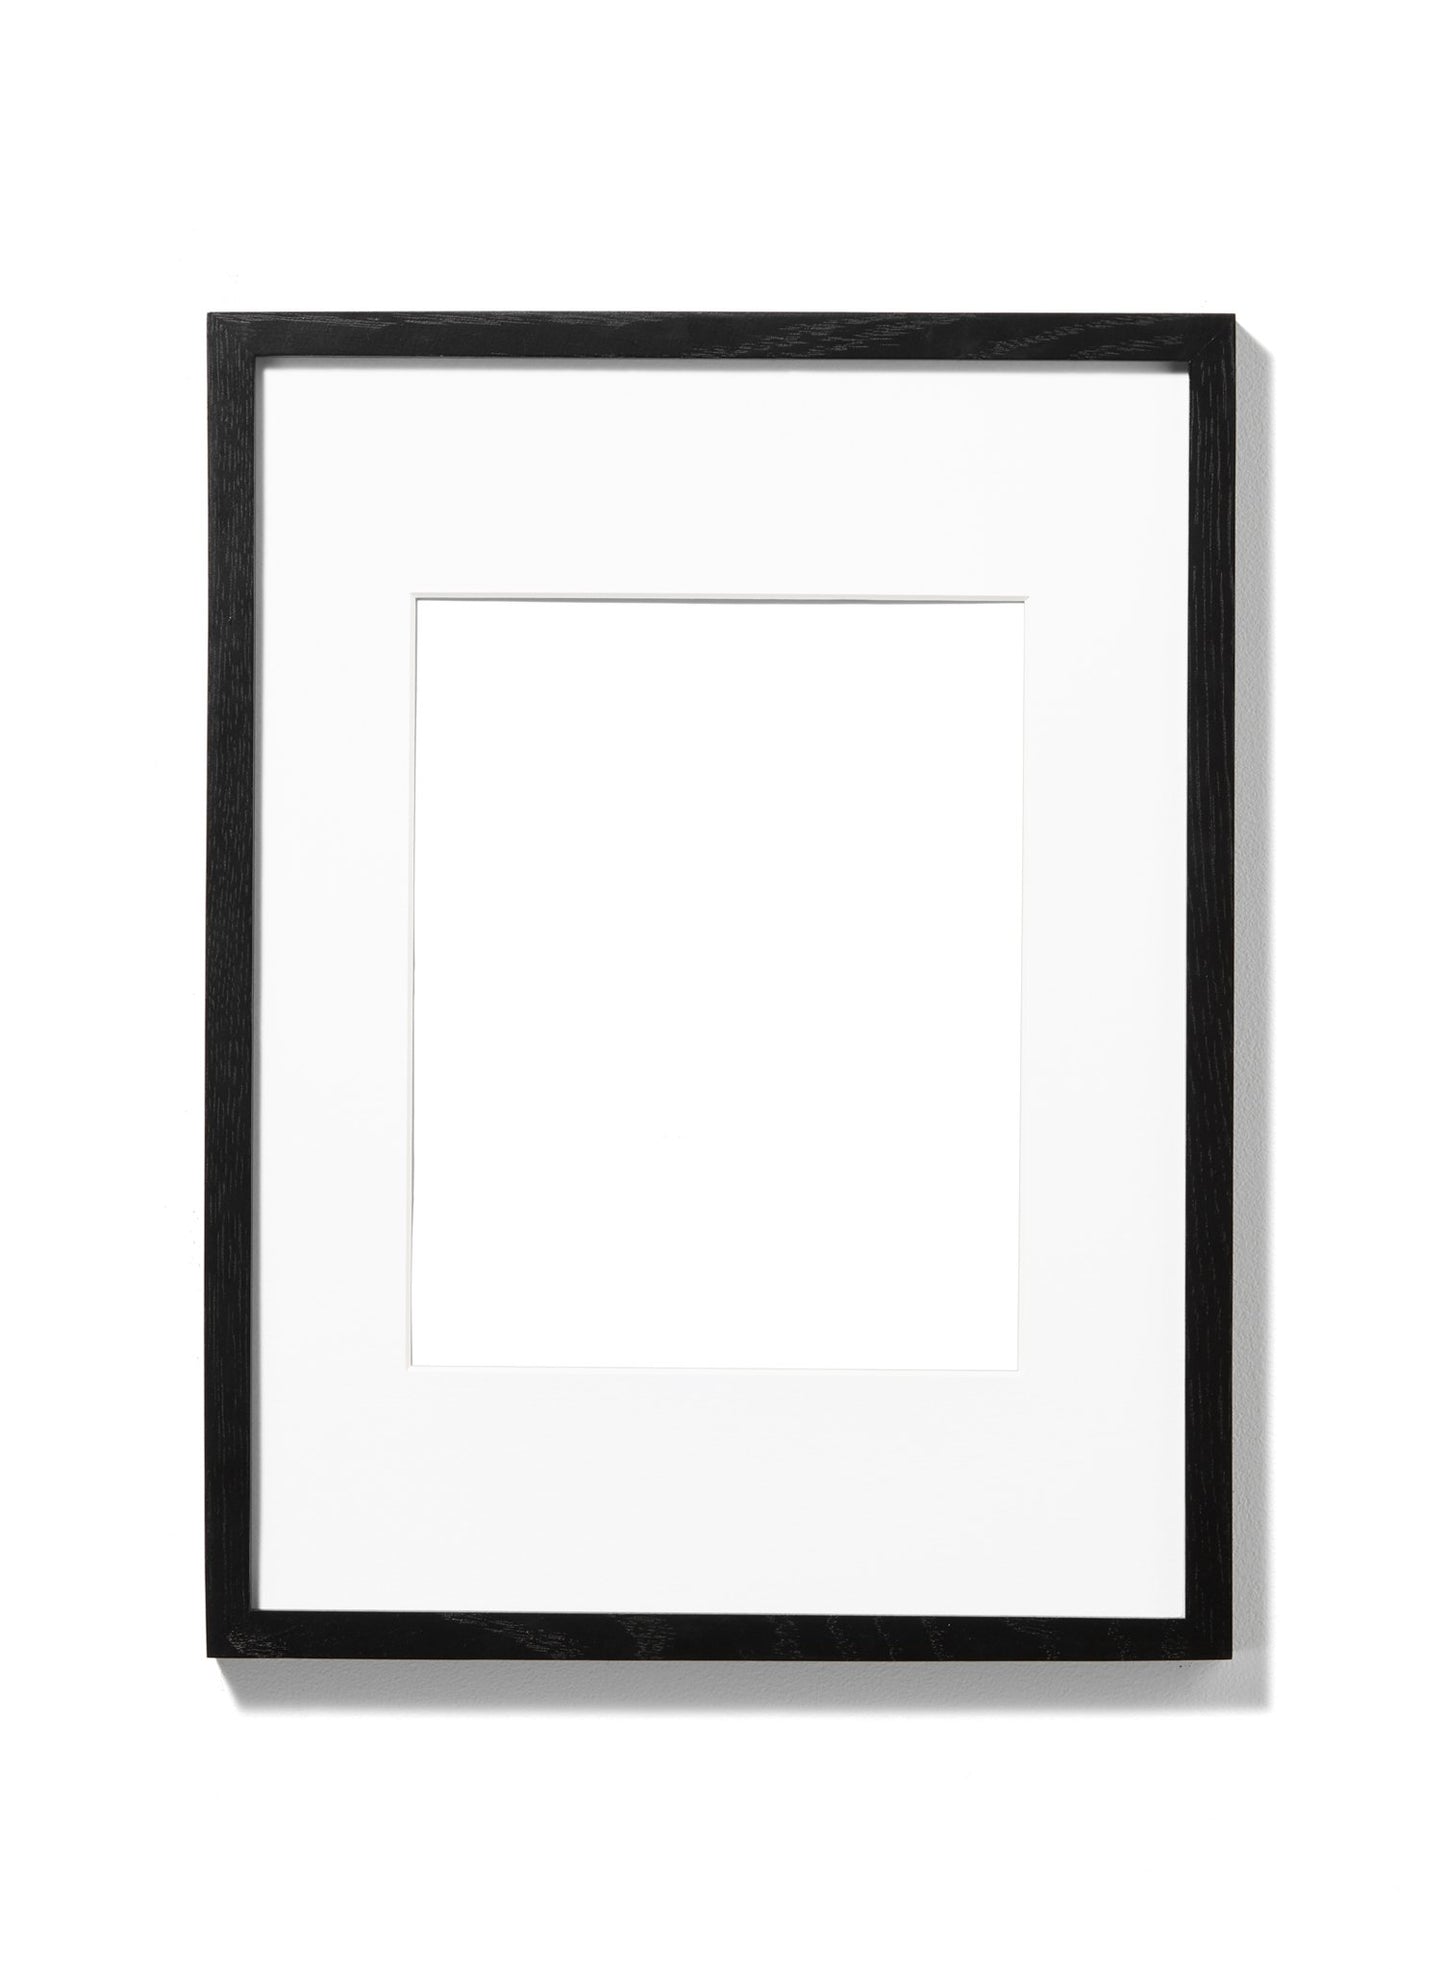 Scandinavian white mat passepartout by Opposite Wall in a frame - for frames - made on acid-free FSC paper